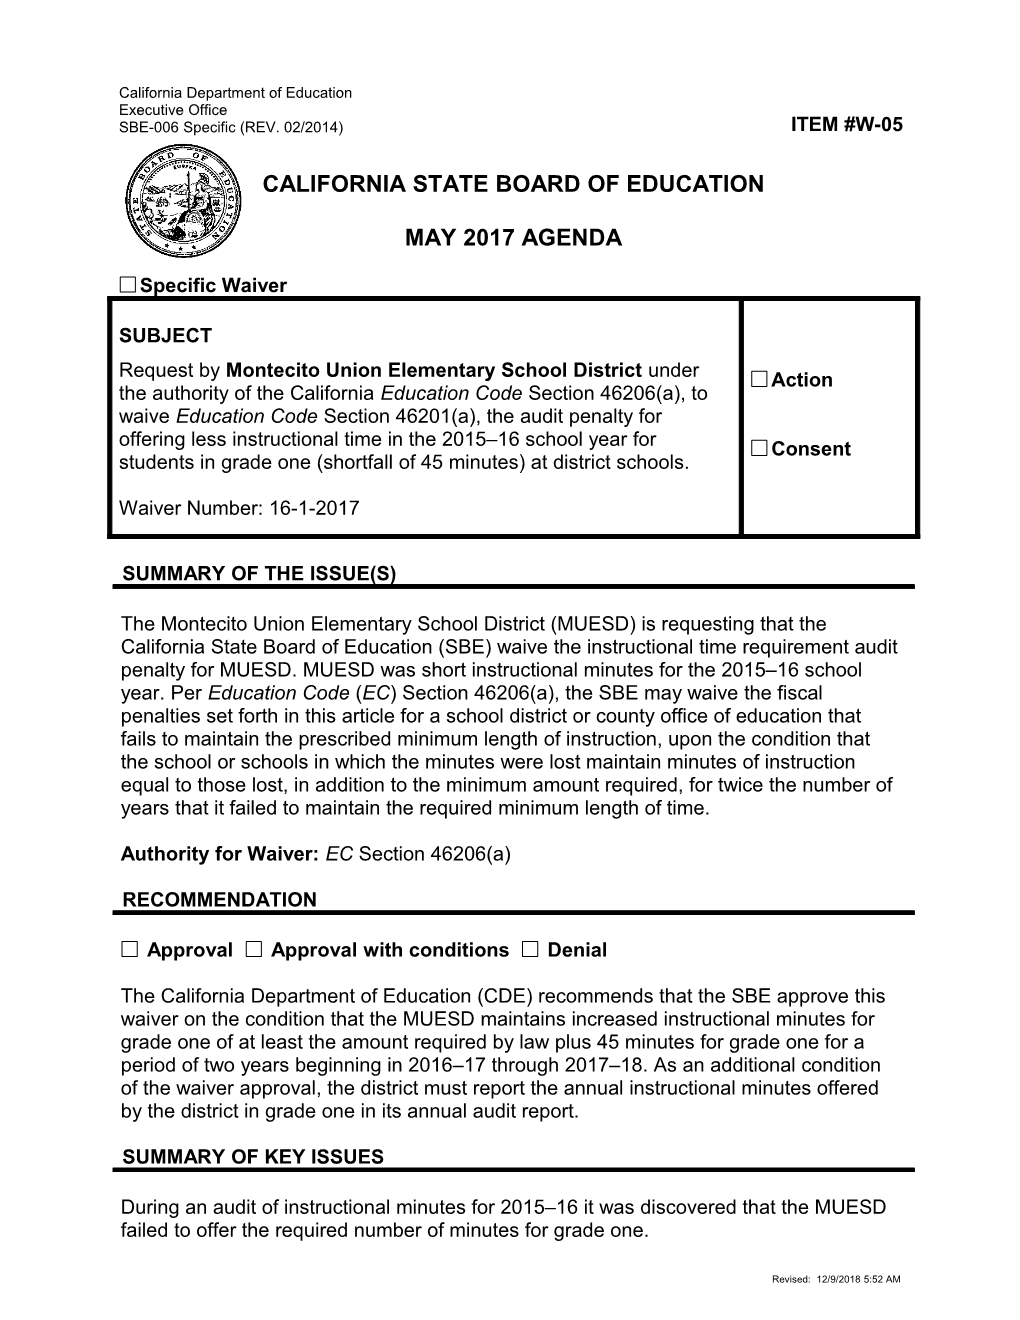 May 2017 Agenda Item W-05 - Meeting Agendas (CA State Board of Education)